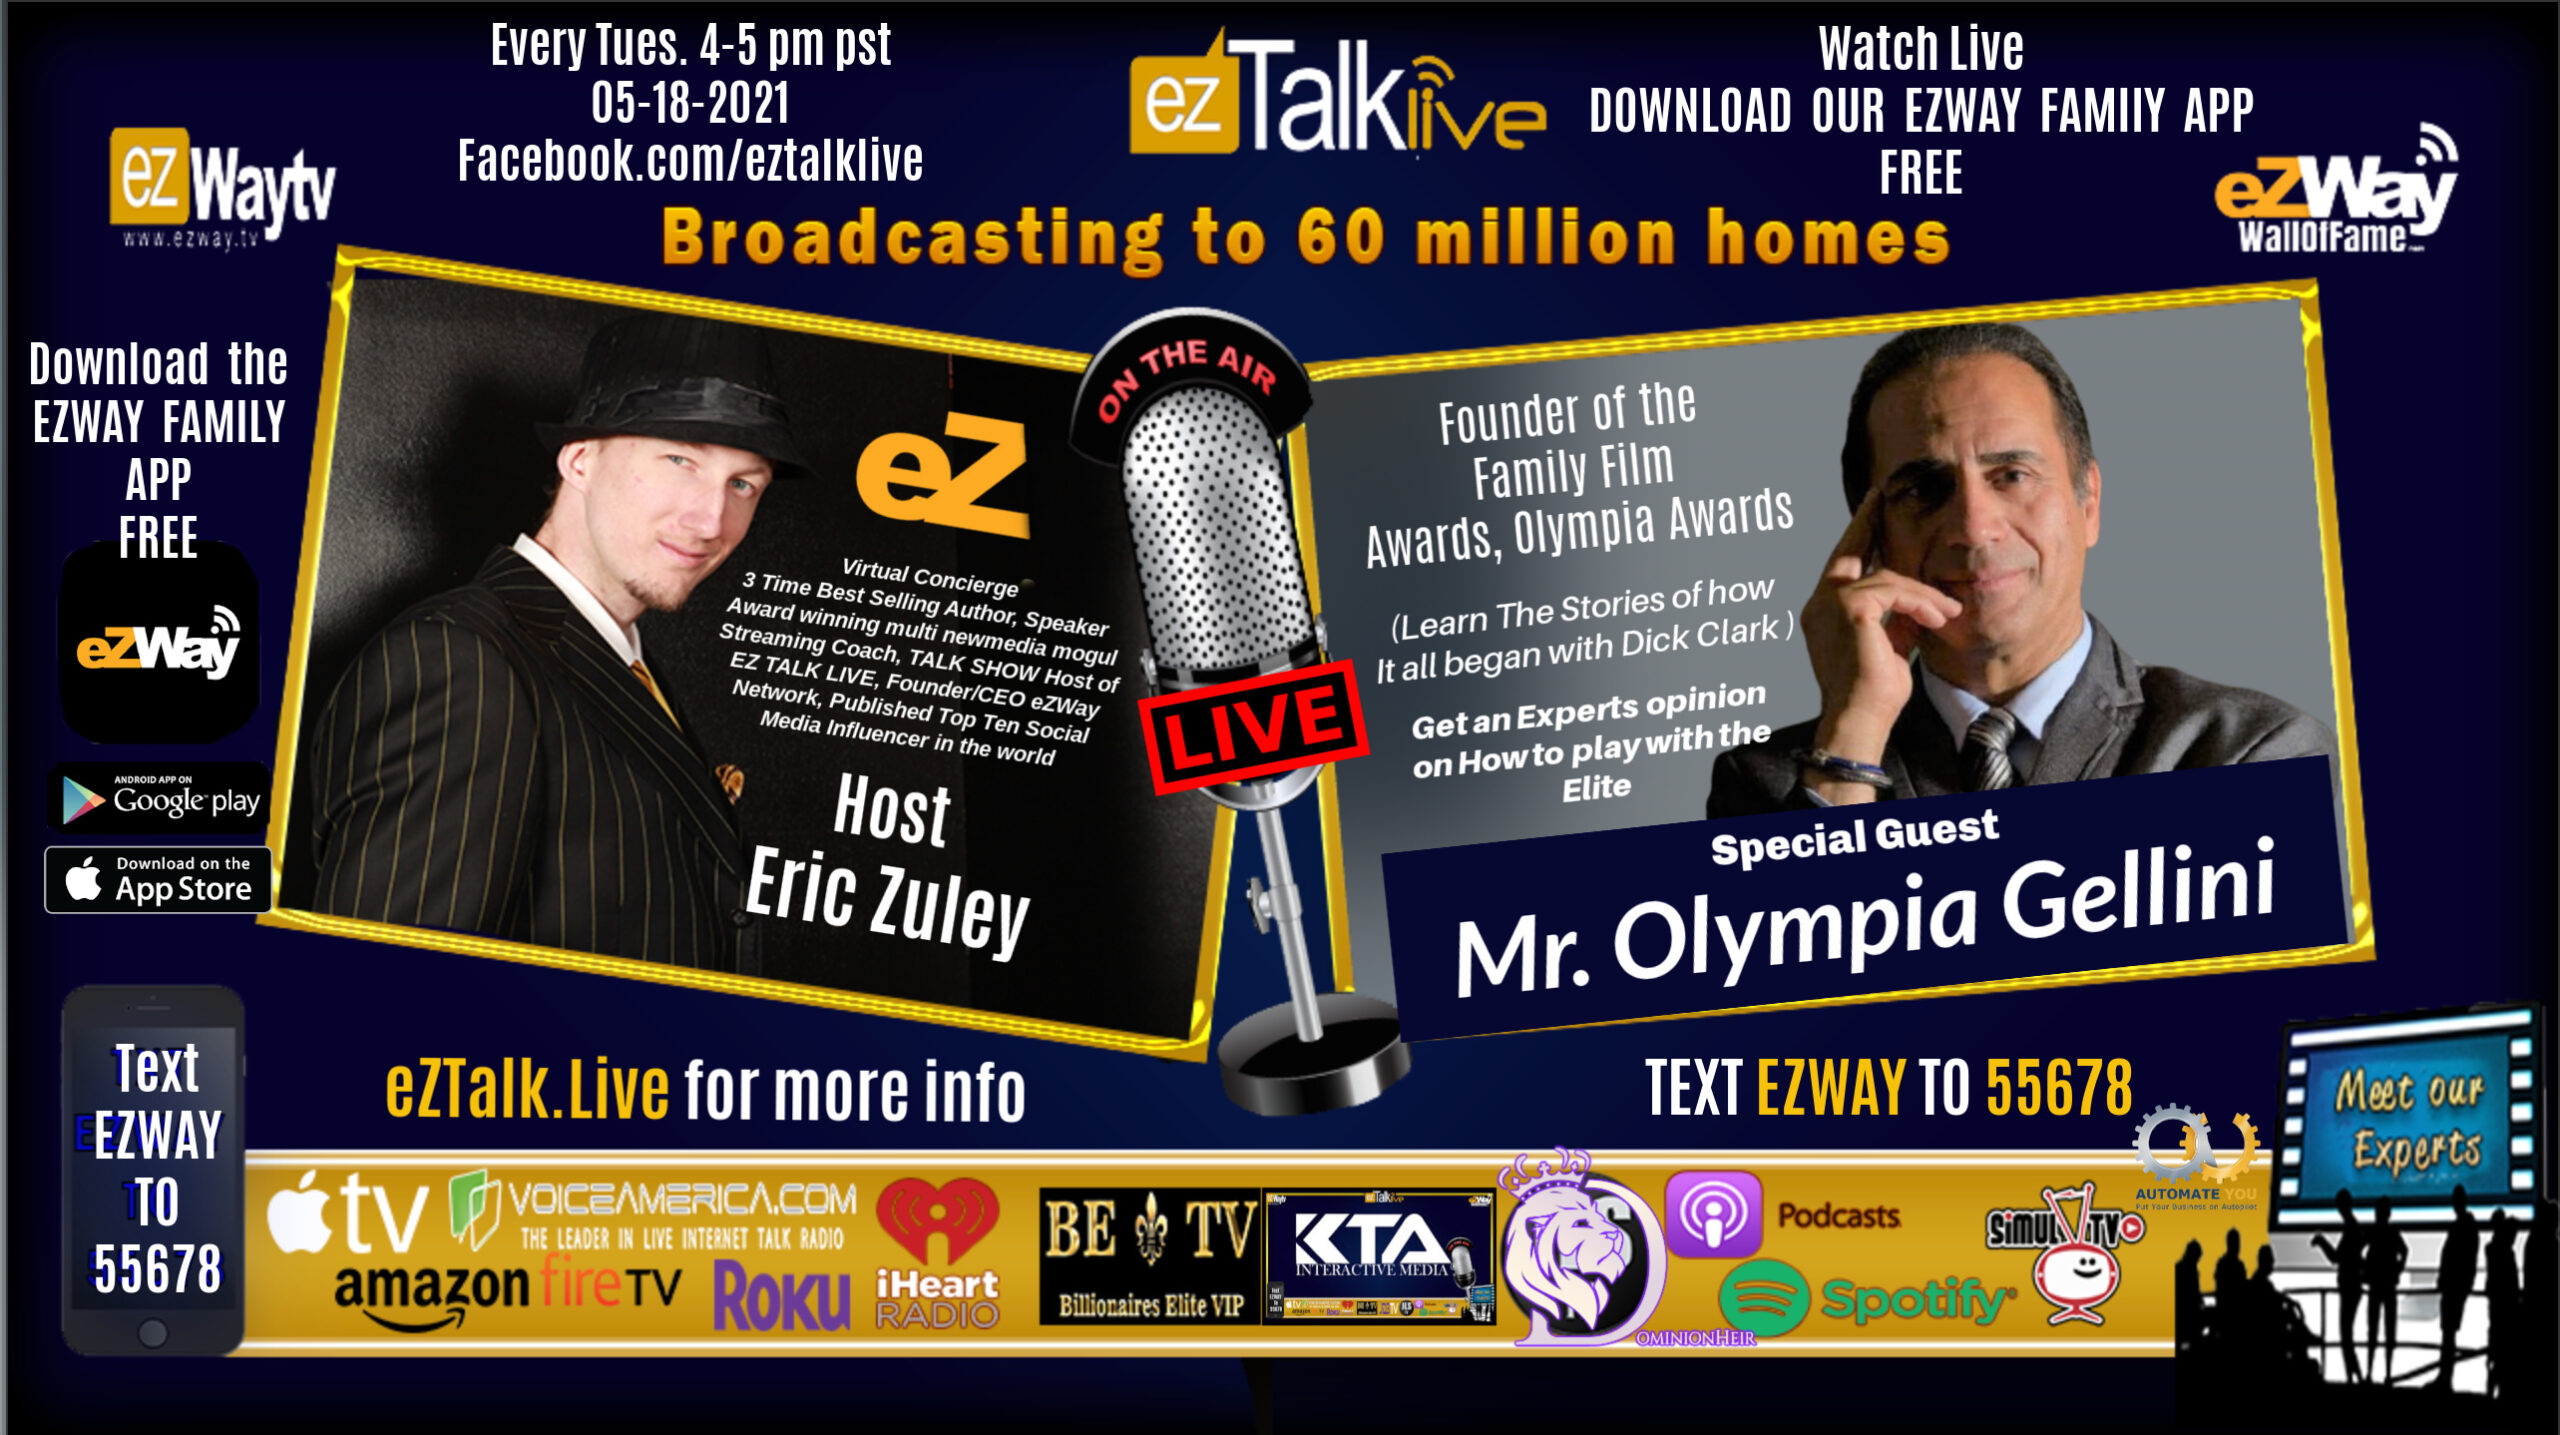 EZ TALK LIVE Feat. Founder of Family  Film Awards co-executive produced by DickClark Mr. Olympia Gellini.